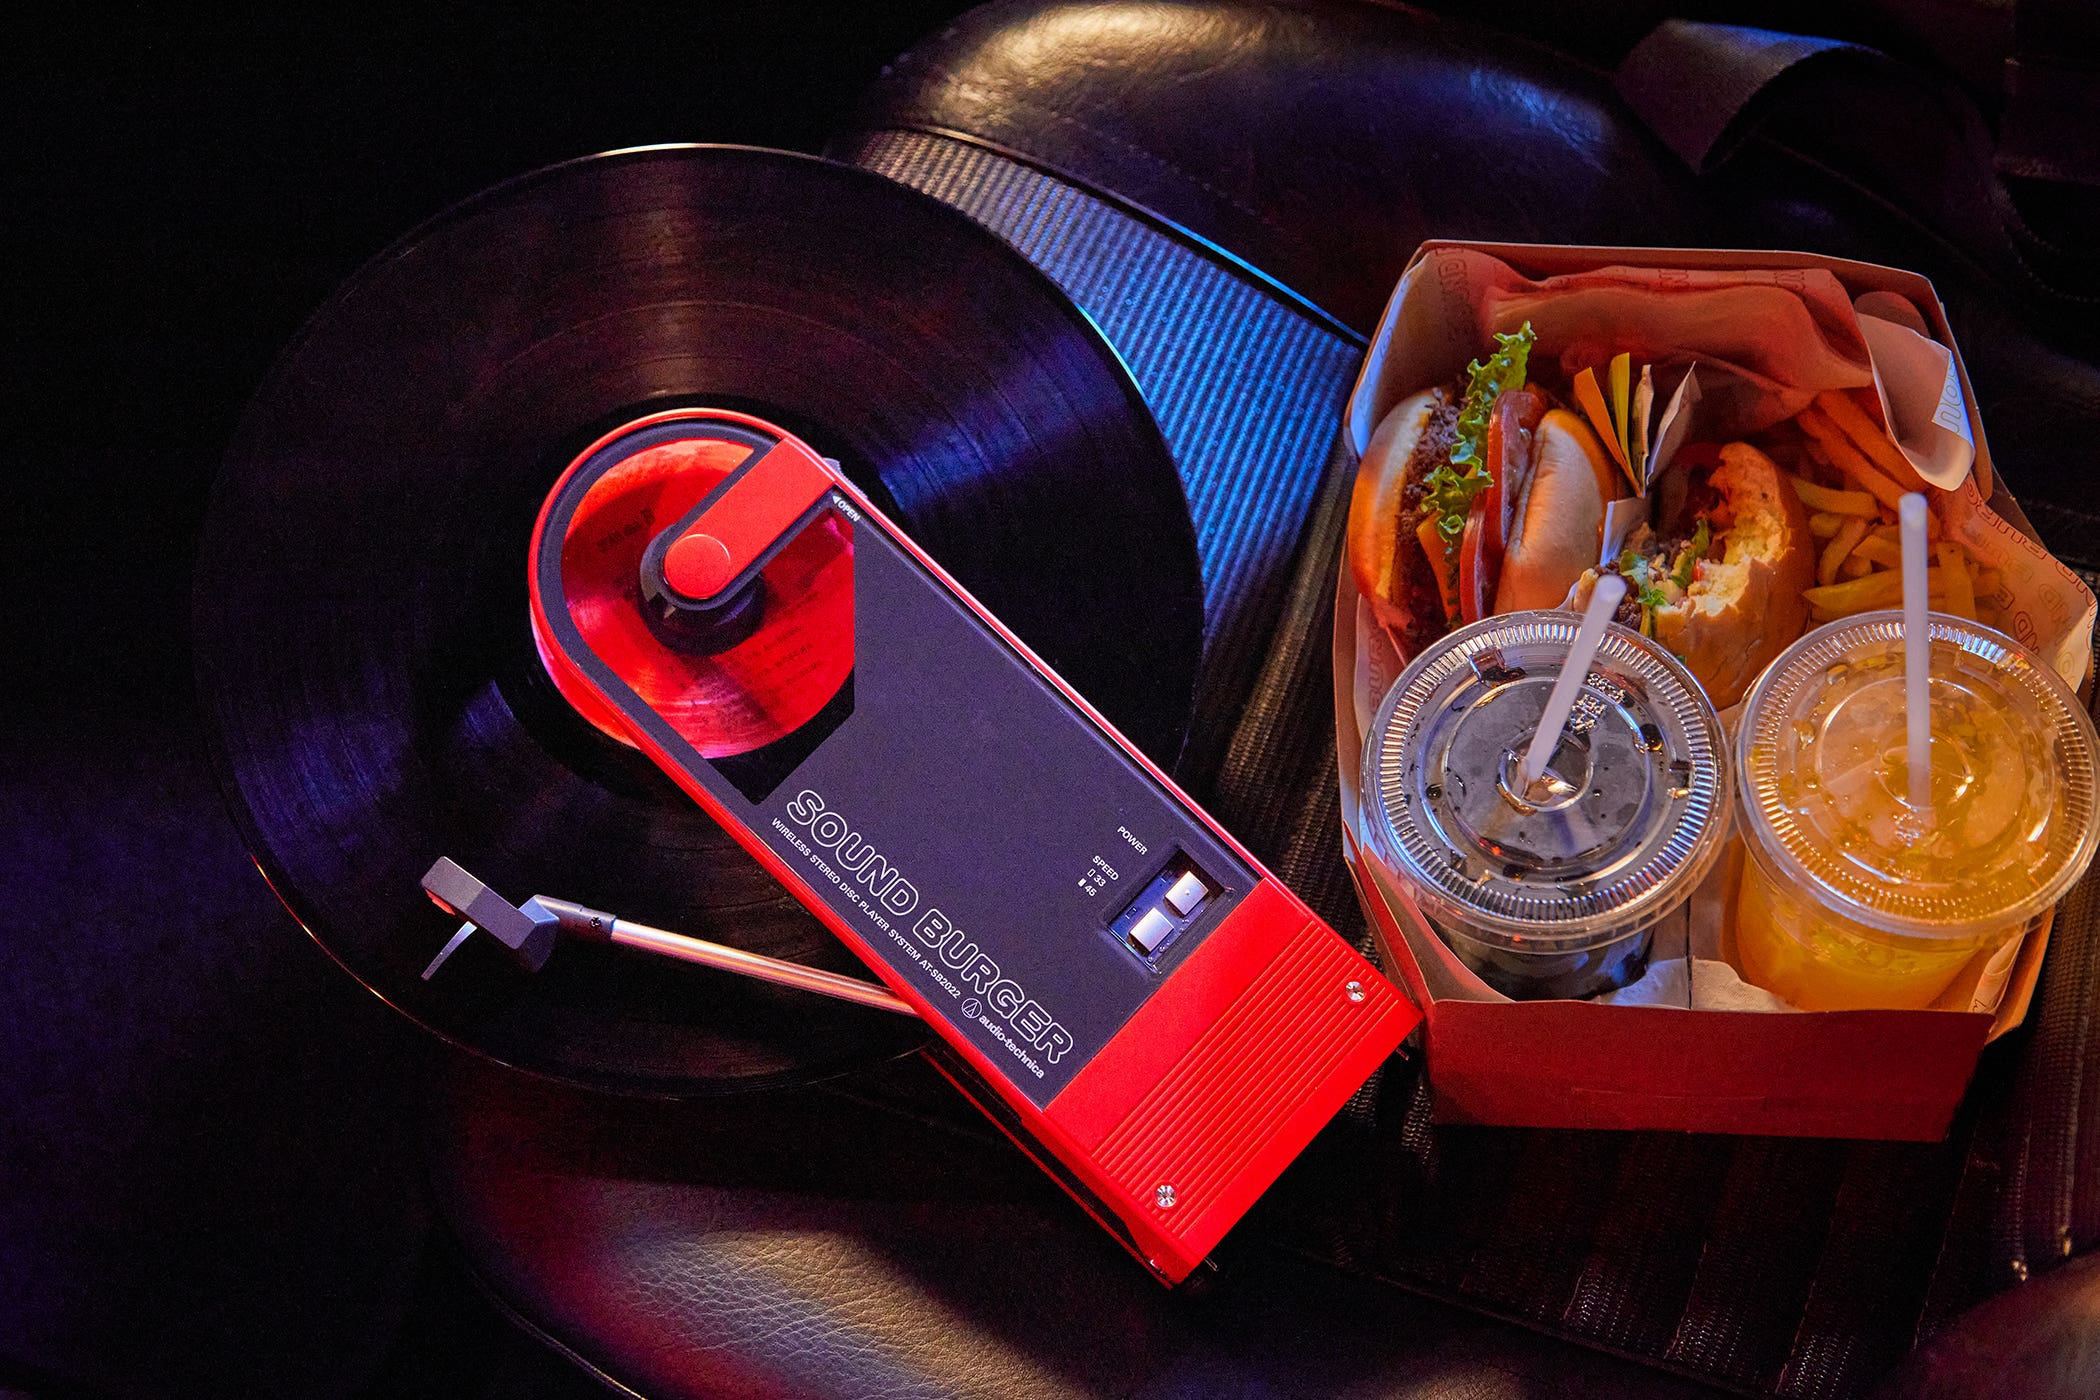 Where to Buy the Limited Edition AT-SB2022 Sound Burger